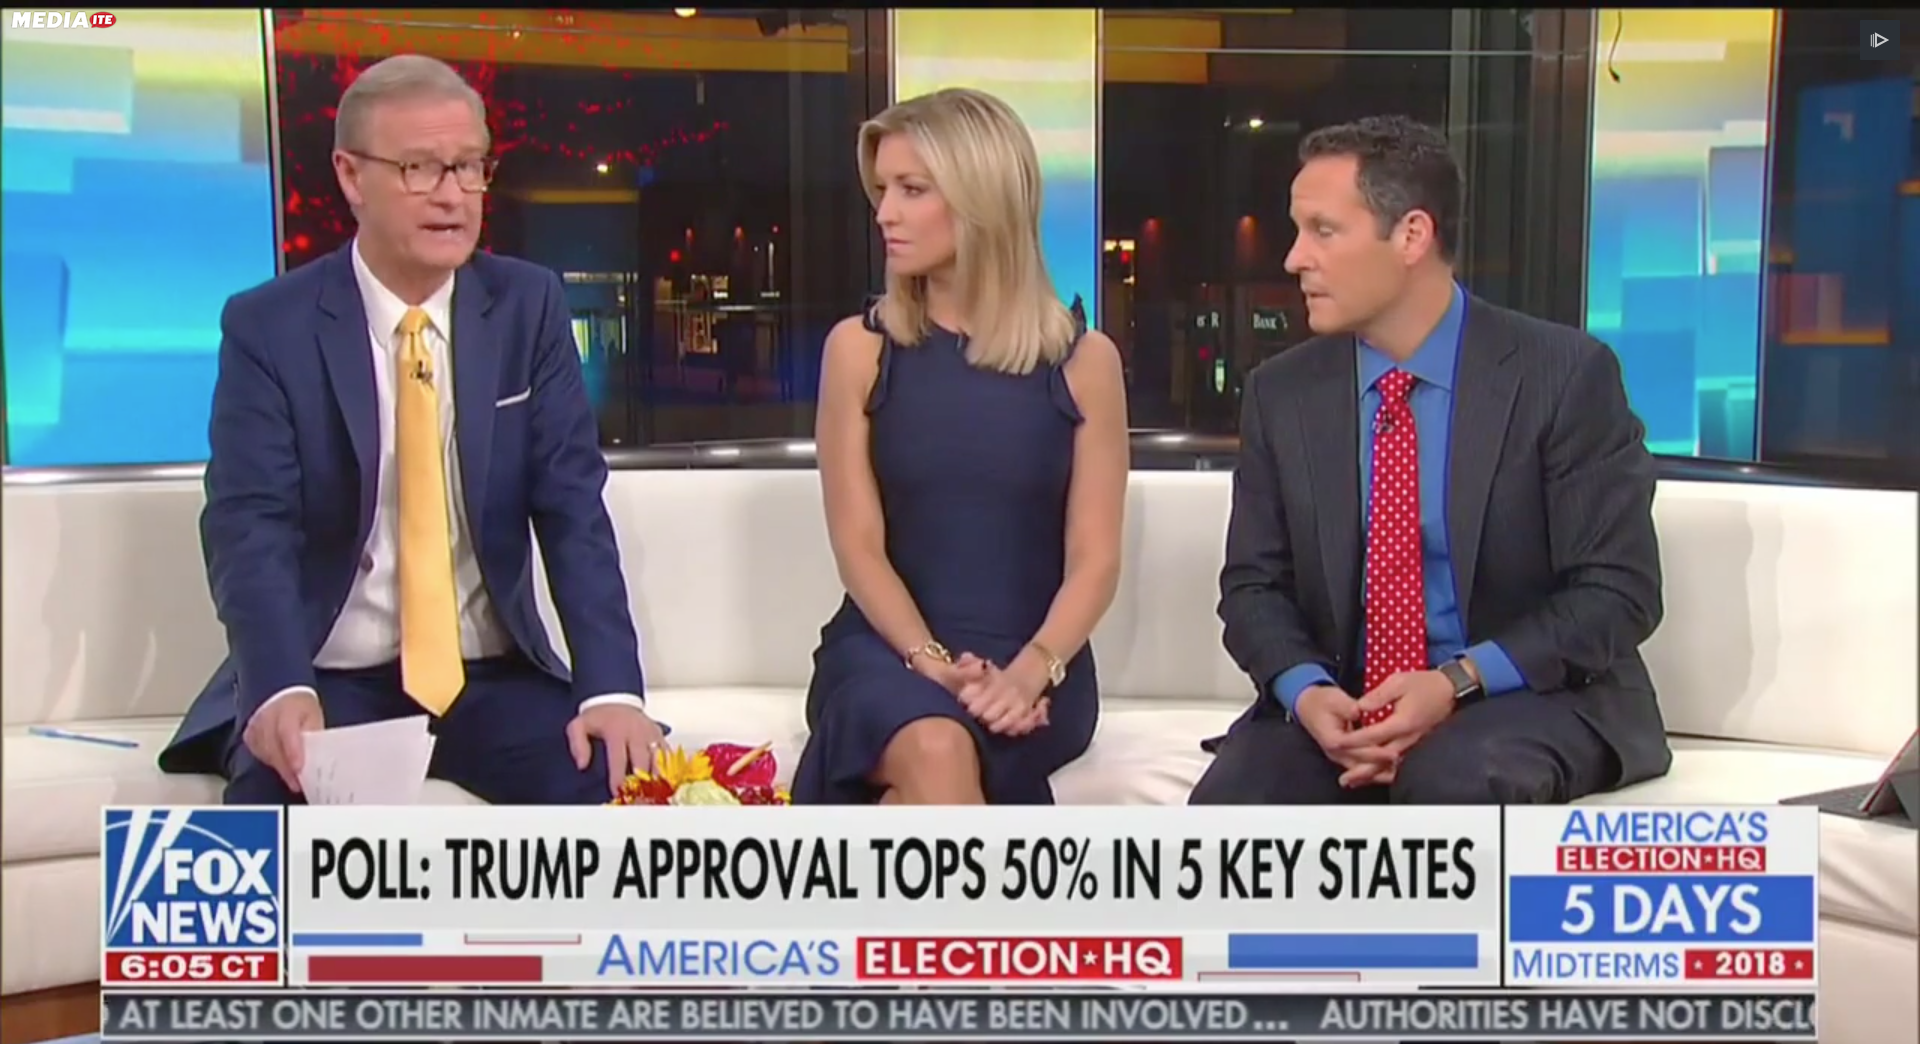 Fox and Friends hosts.